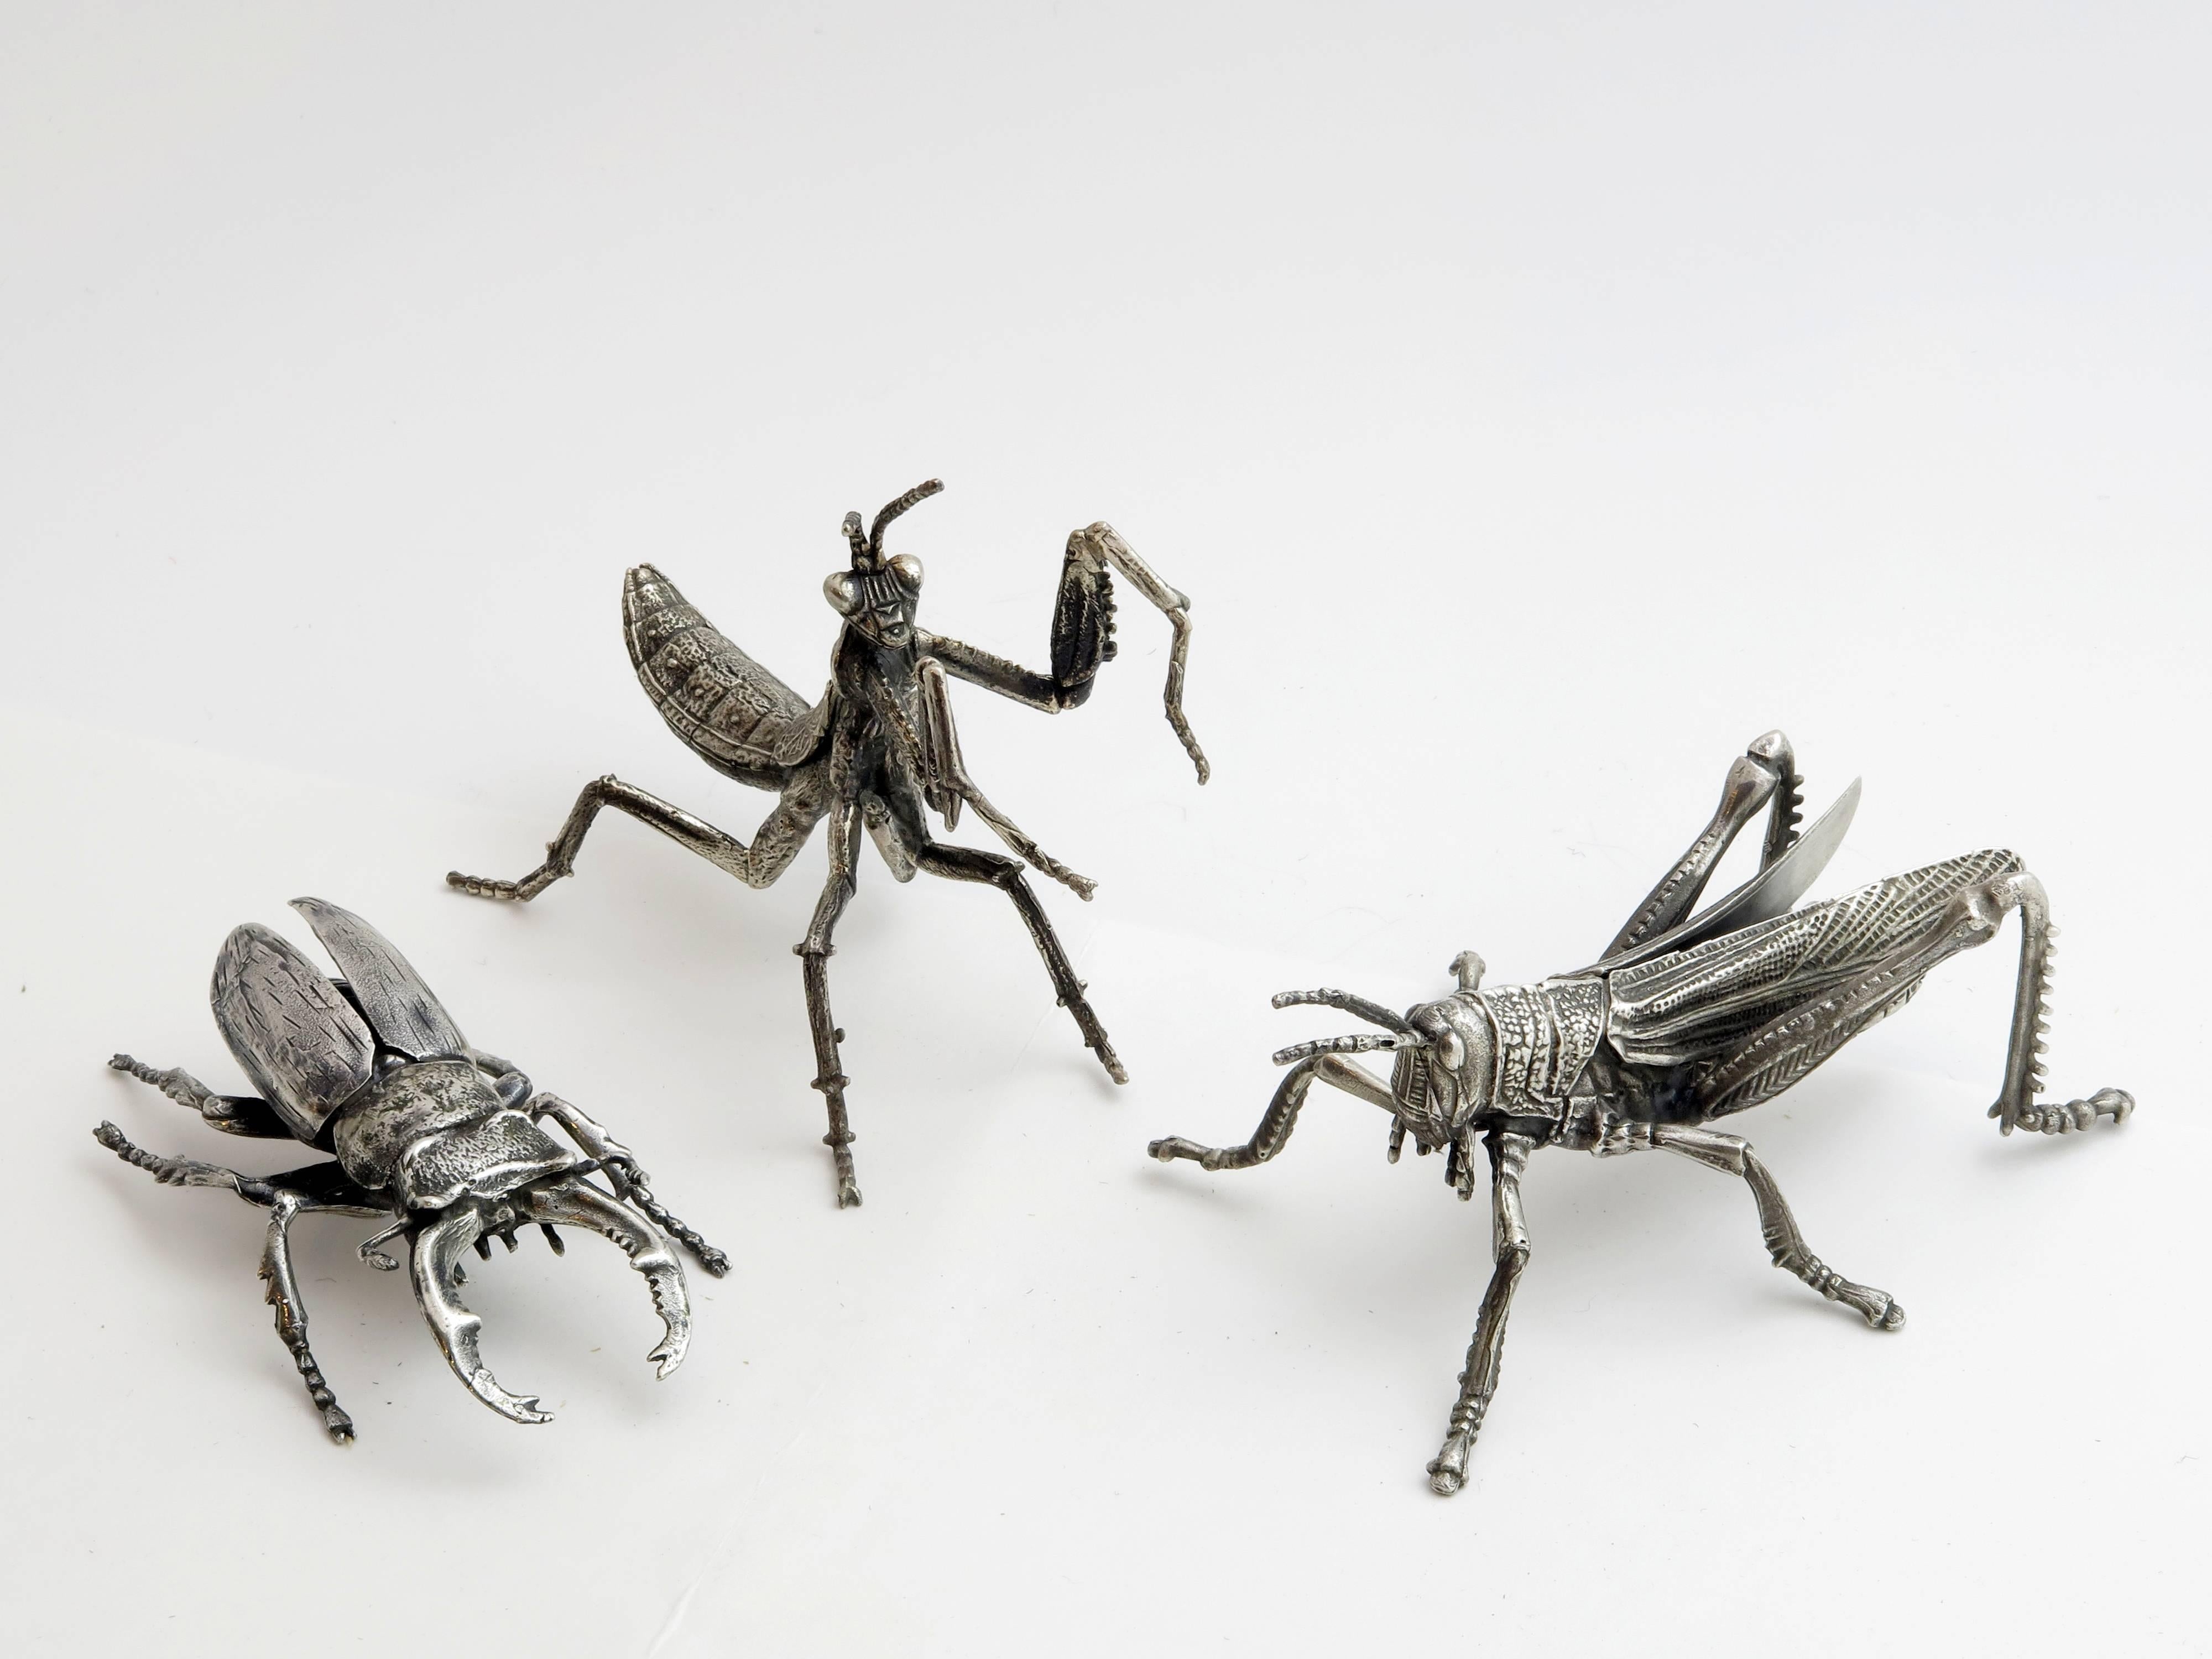 A collection of wonderfully details three whimsical sterling silver bugs. Beetle, dancing mantis and grass hopper. All marked 